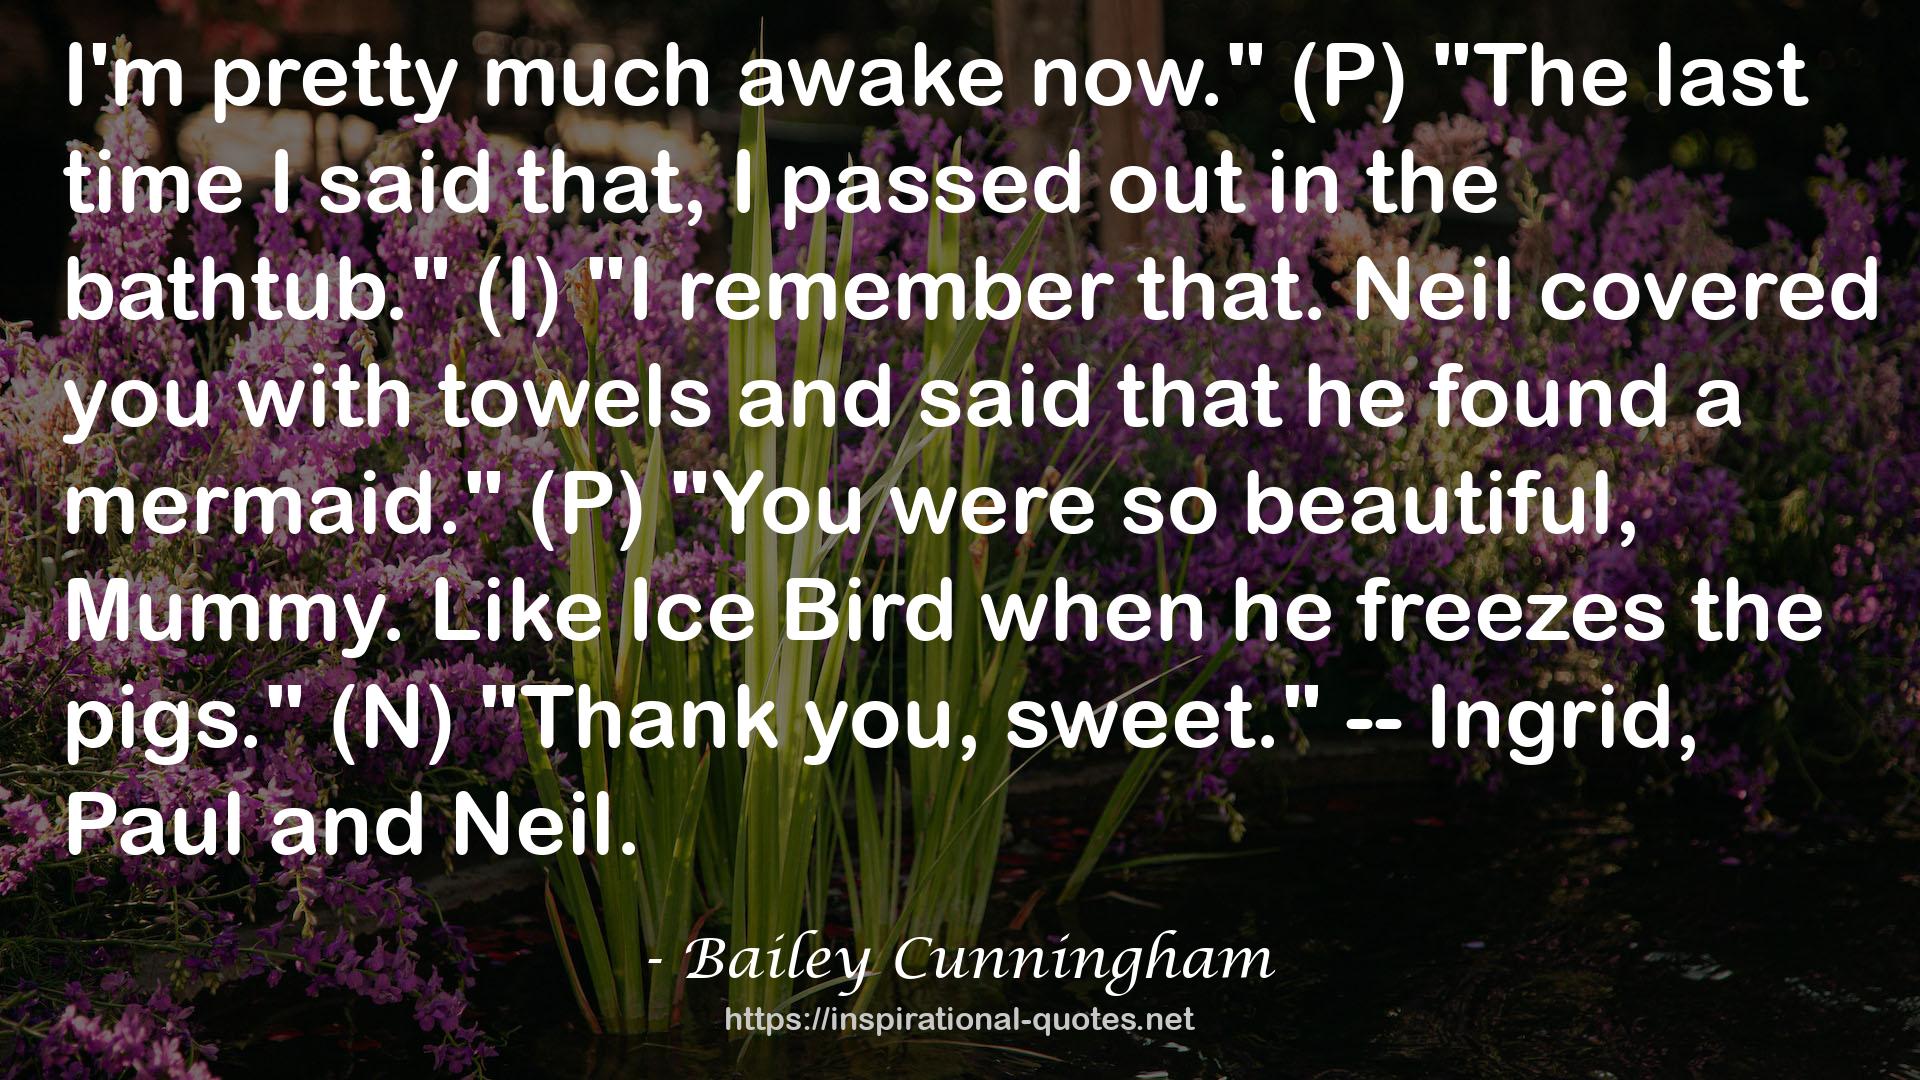 Bailey Cunningham QUOTES